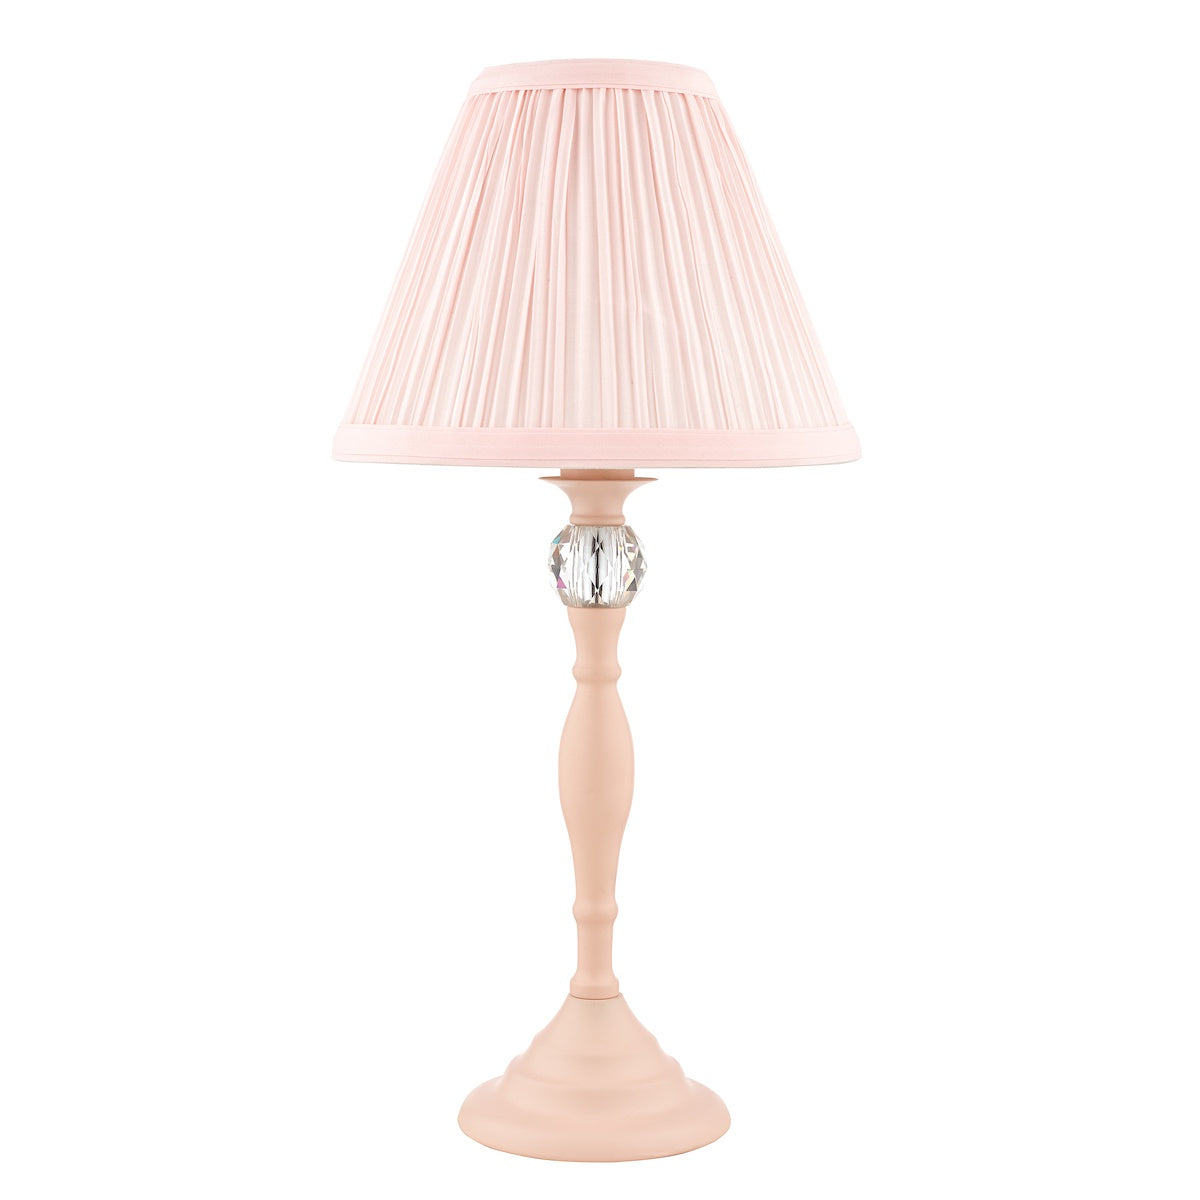 Laura Ashley Ellis Satin-Painted Spindle LA3724950-Q  Table Lamp with Blush Shade